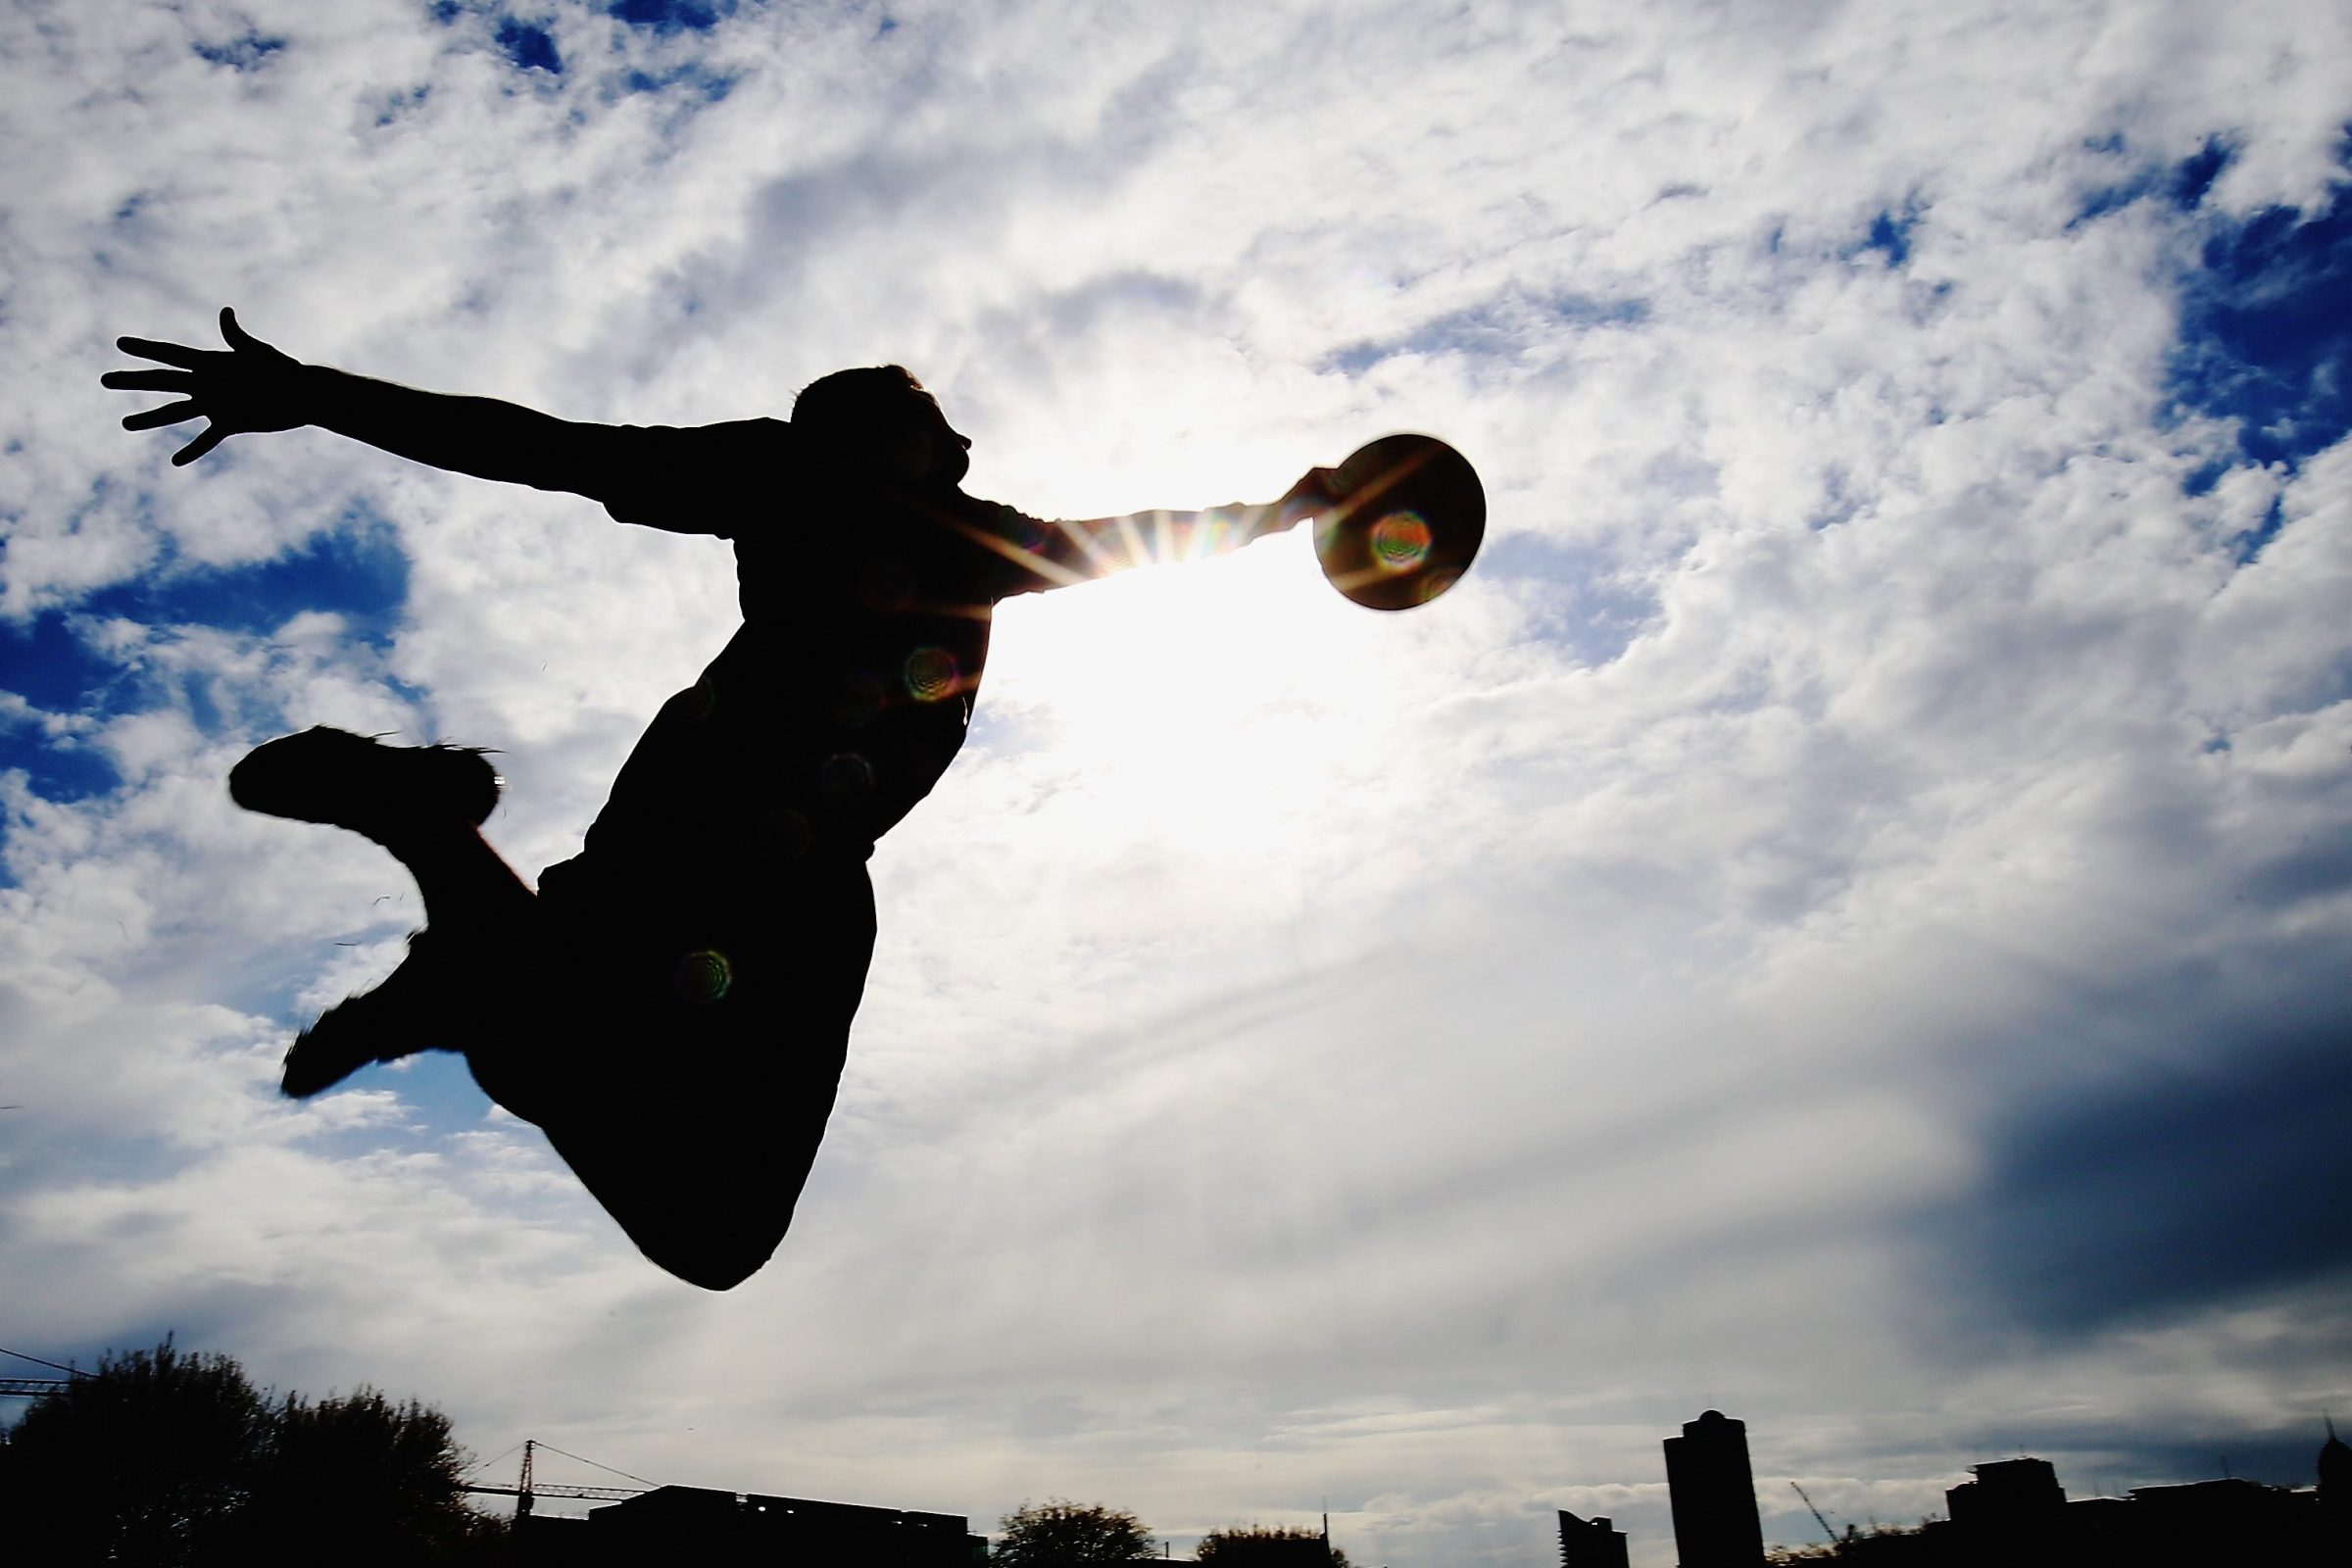 An ultimate frisbee player leaps to make a catch, silhouetted against the sun